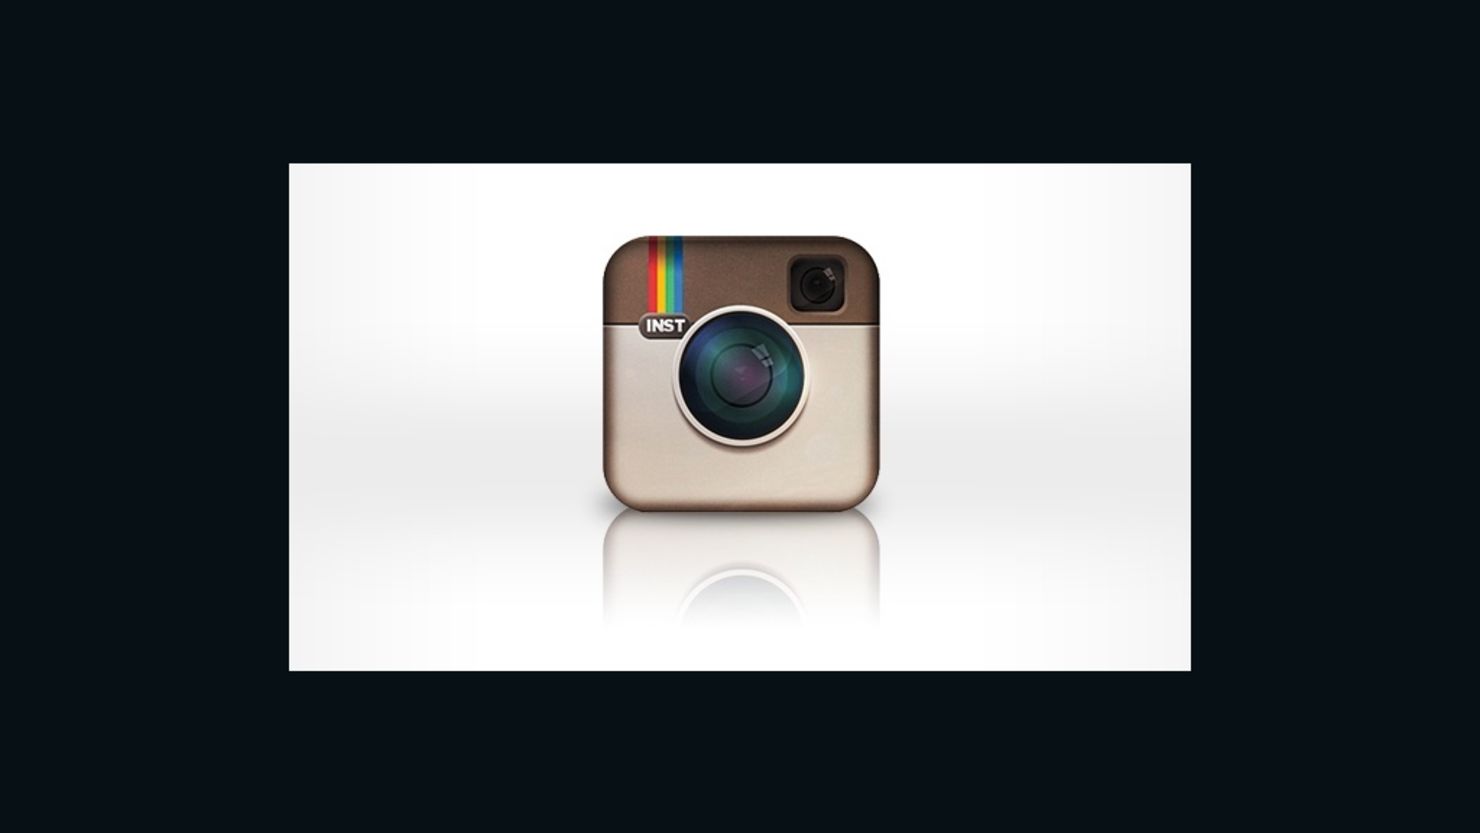 After being available only on iPhones and iPads, fast-growing app Instagram is now available for Android.